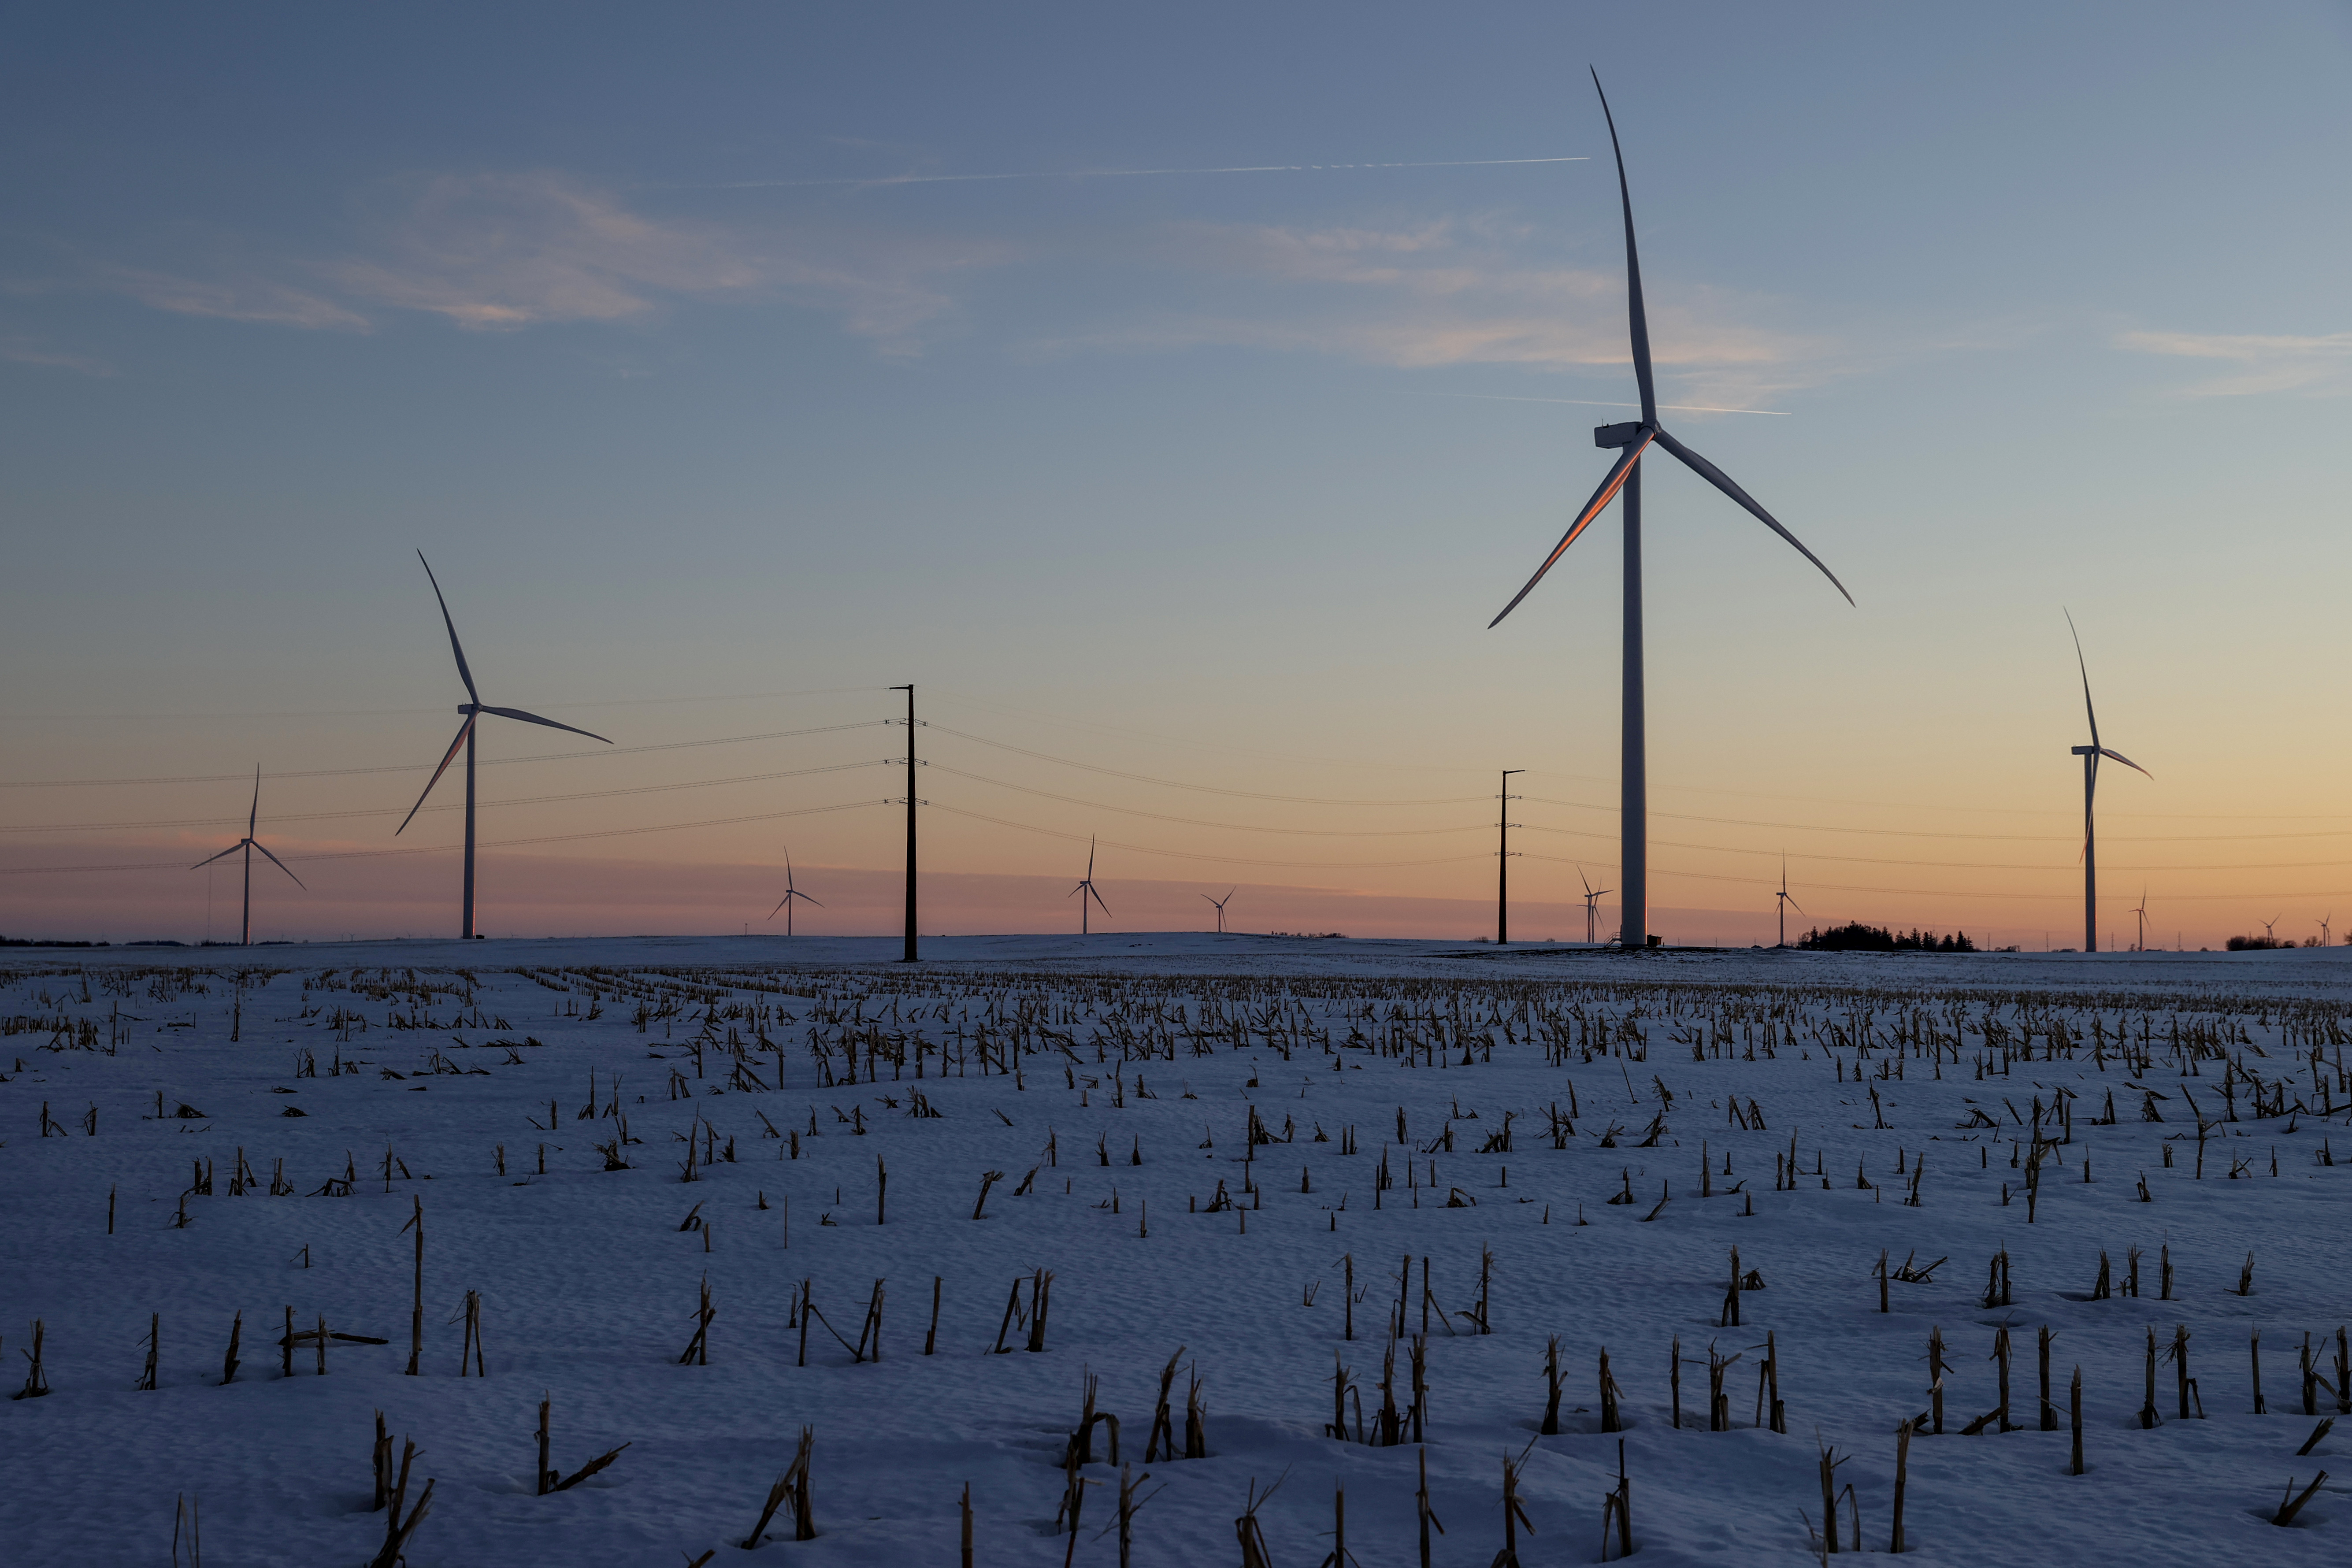 A wind farm shares space with corn fields the day before the Iowa caucuses, where agriculture and clean energy are key issues, in Latimer, Iowa, U.S. February 2, 2020. REUTERS/Jonathan Ernst/File Photo